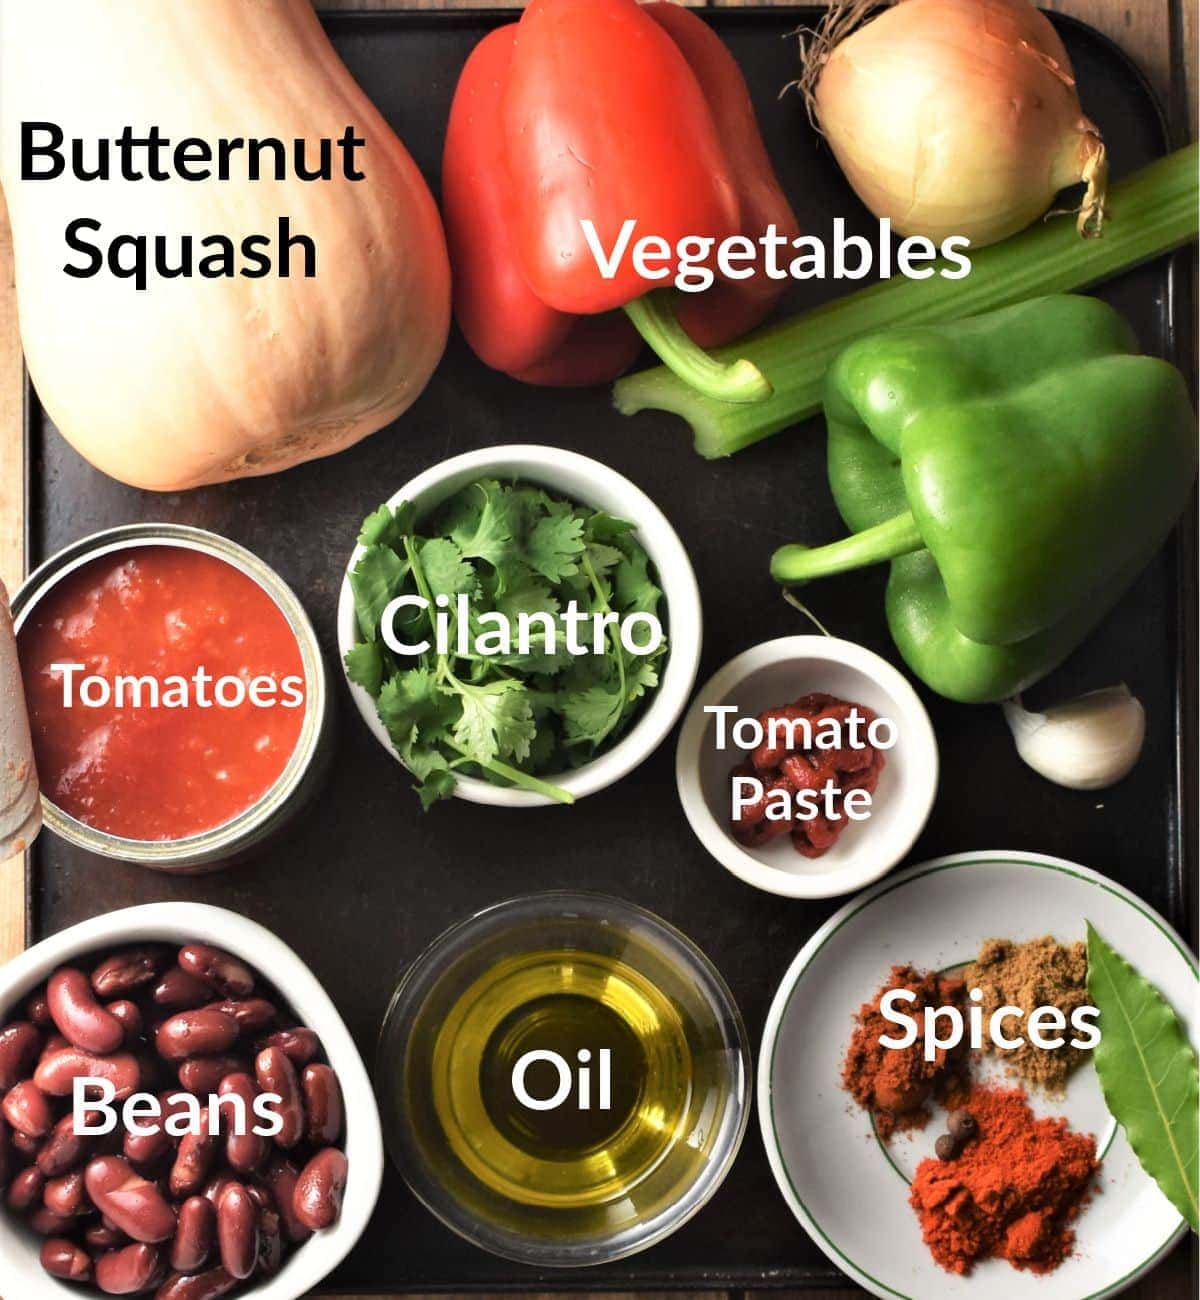 Butternut squash chili ingredients in individual dishes.